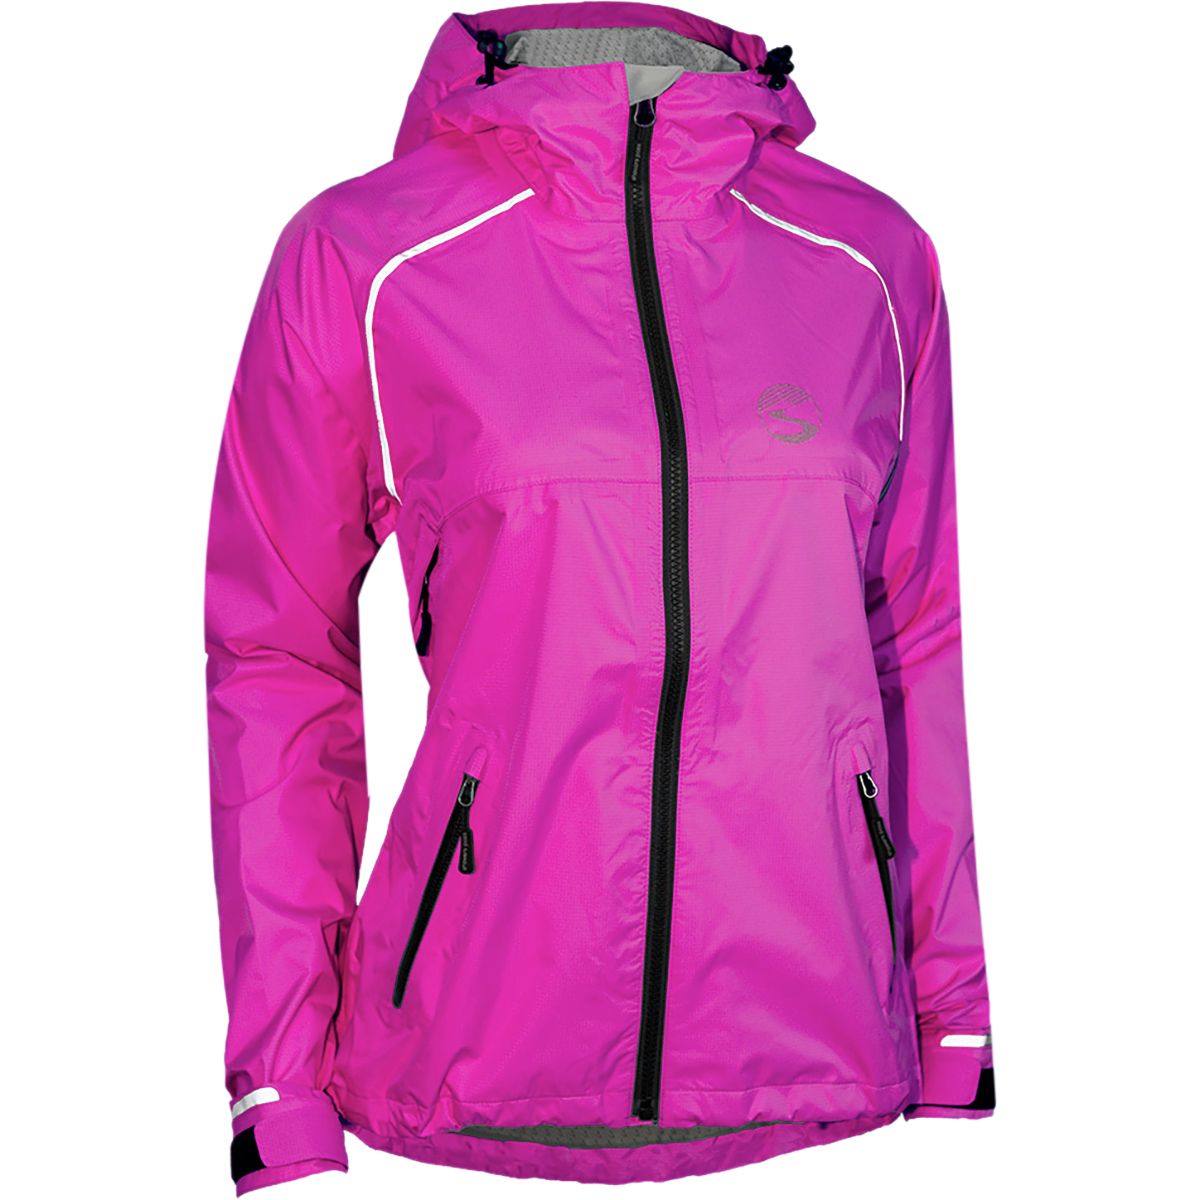 Showers Pass Syncline Jacket - Women's